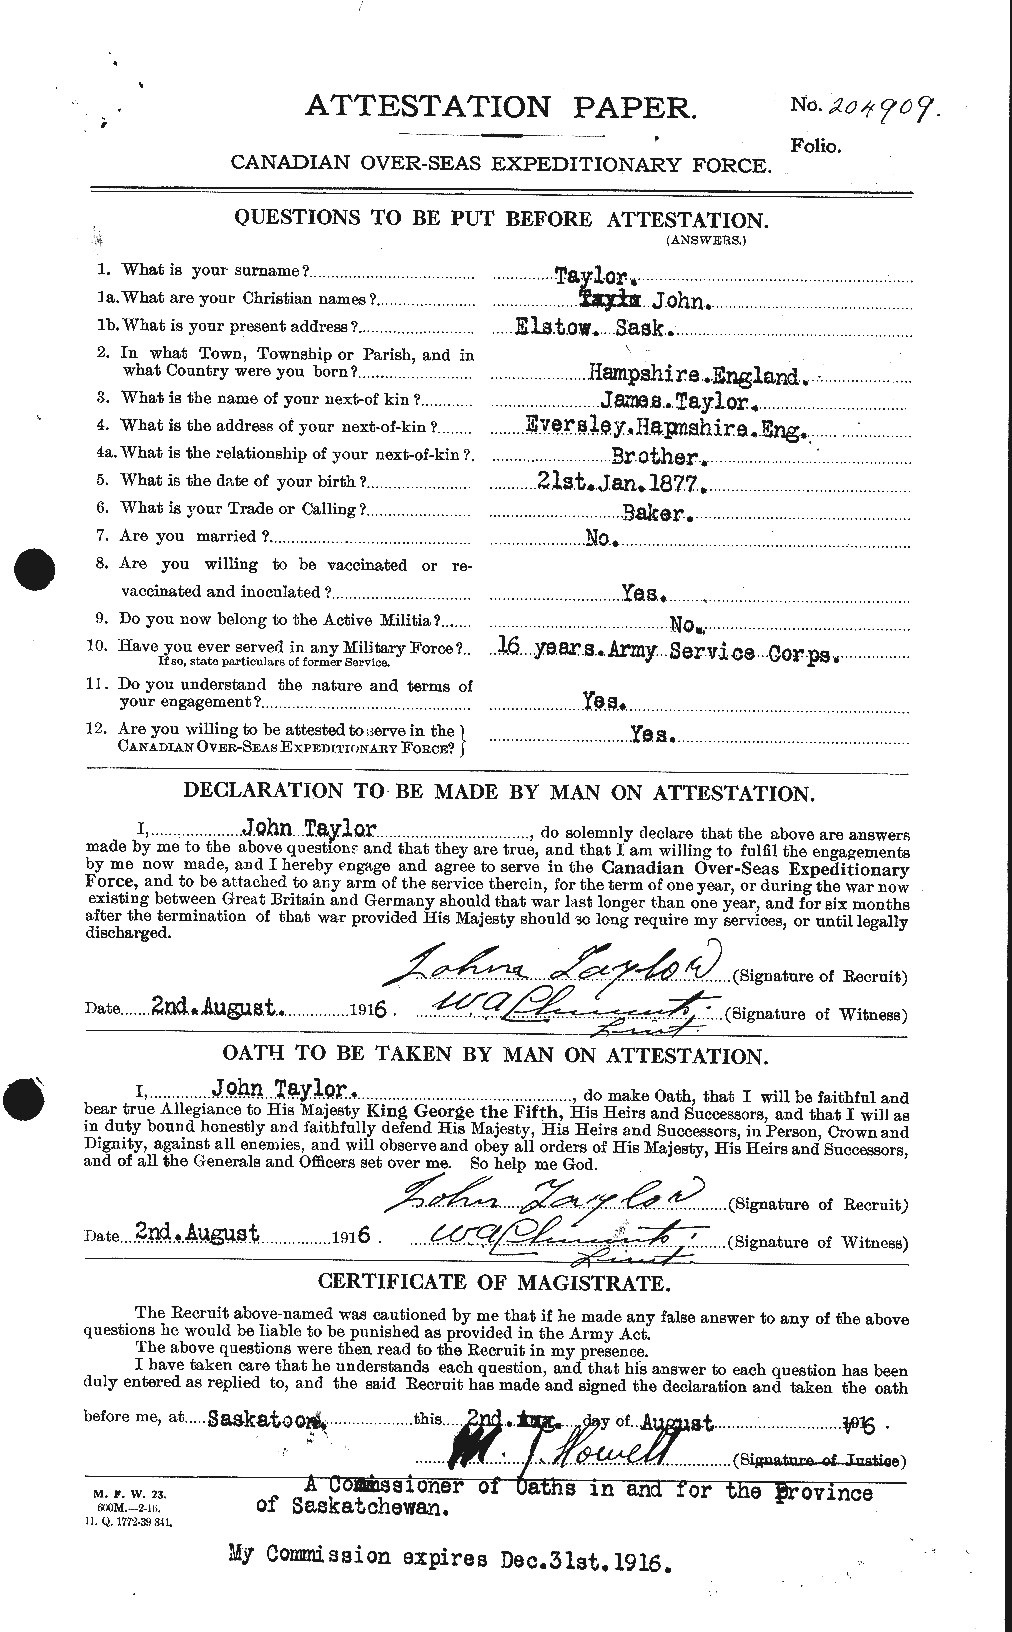 Personnel Records of the First World War - CEF 627029a